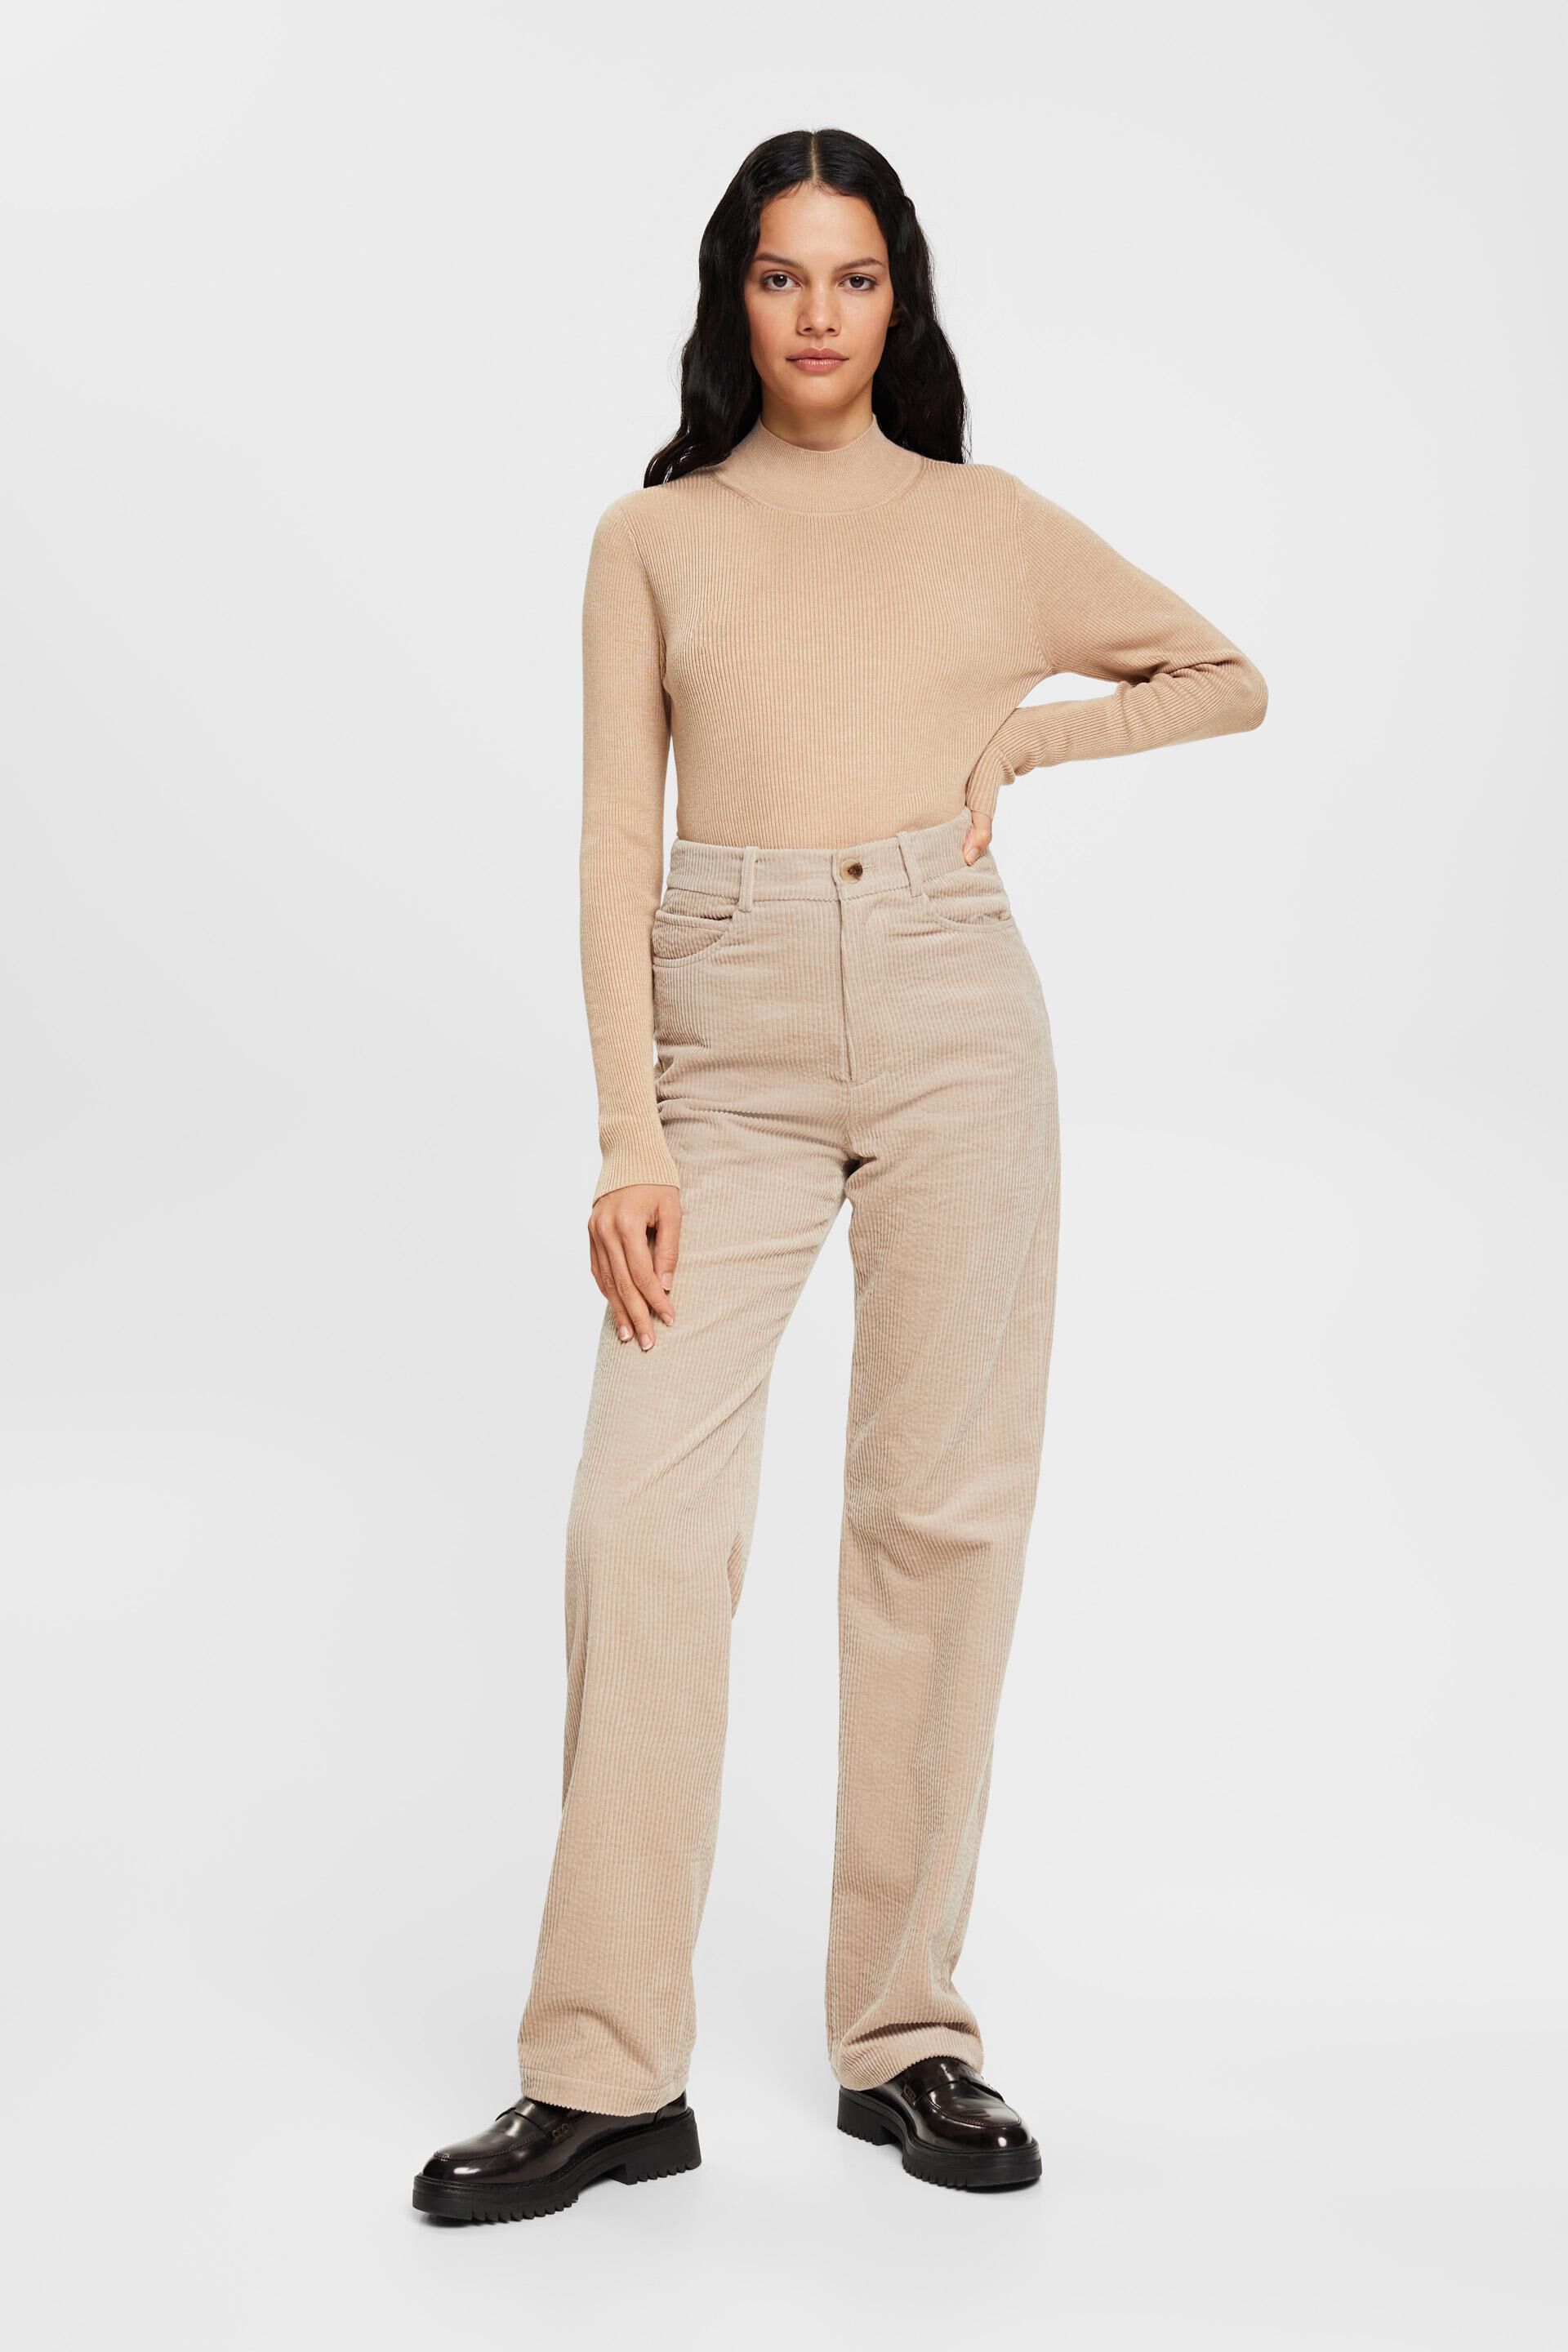 Shop the Latest in Womens Fashion Midrise corduroy trousers  ESPRIT Hong  Kong Official Online Store